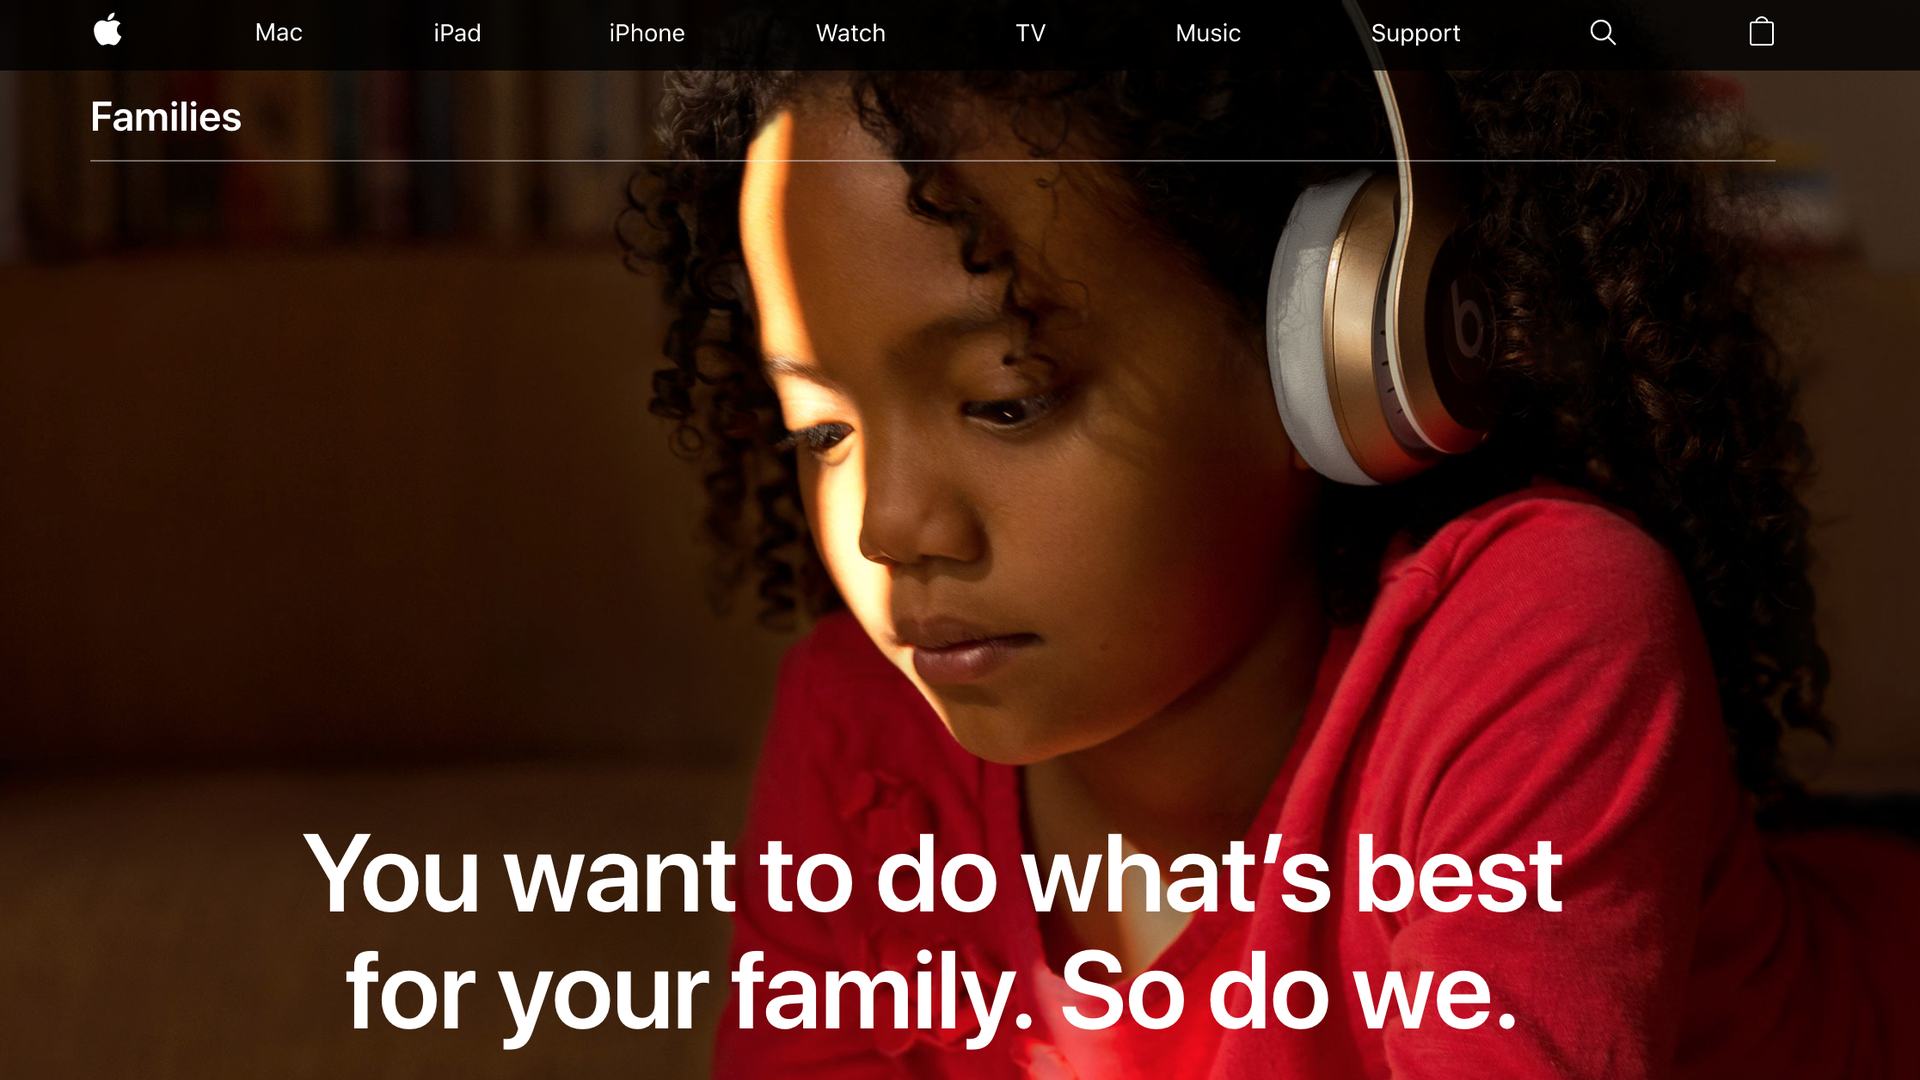 Family Brand: Take Back Your Family on Apple Podcasts